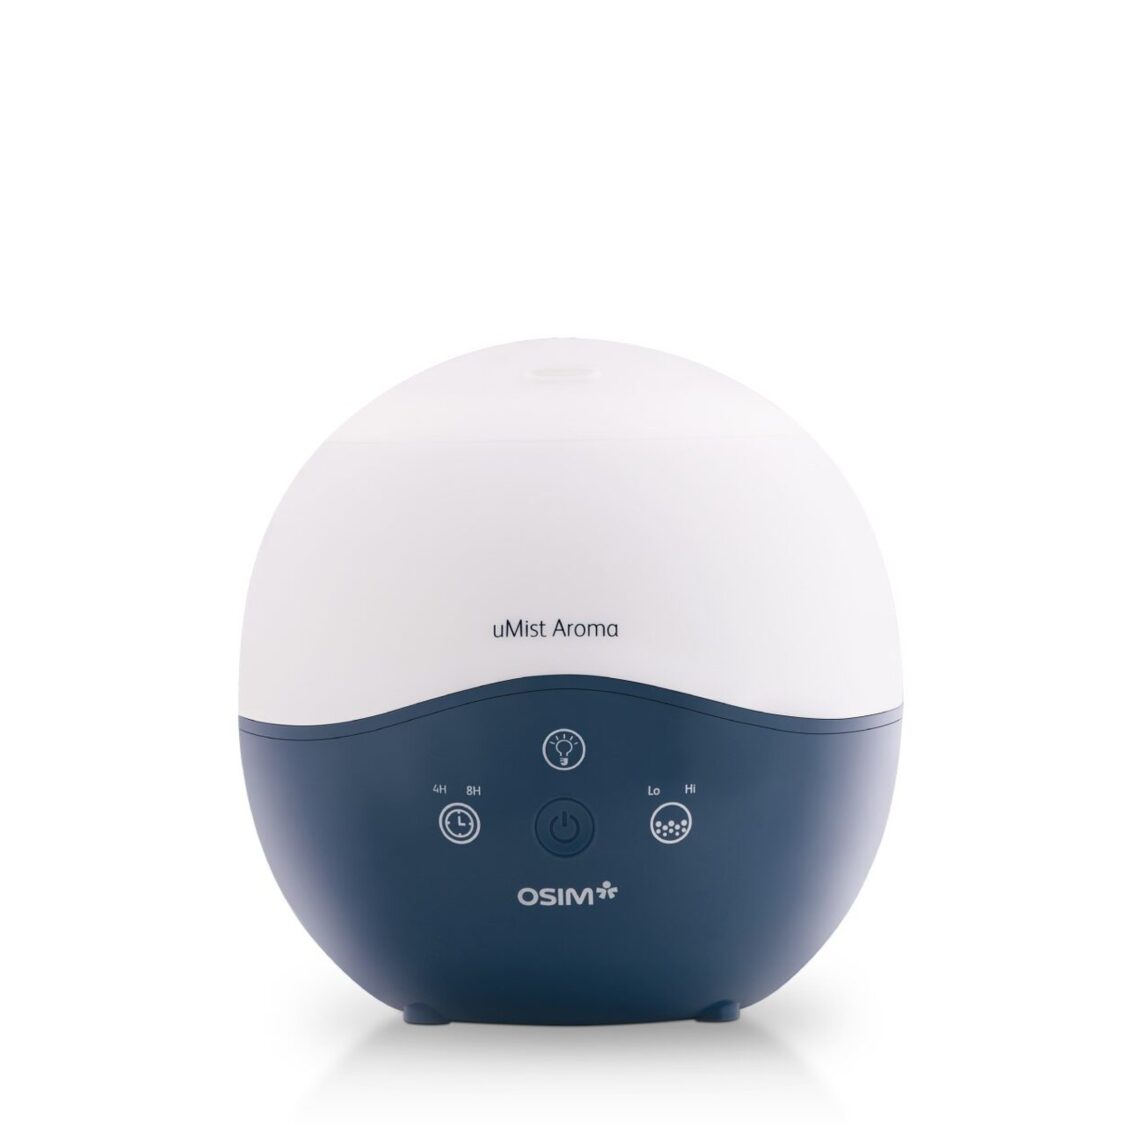 OSIM uMist Aroma Air Humidifier with Complimentary Scent Lavender or Aroma Tea